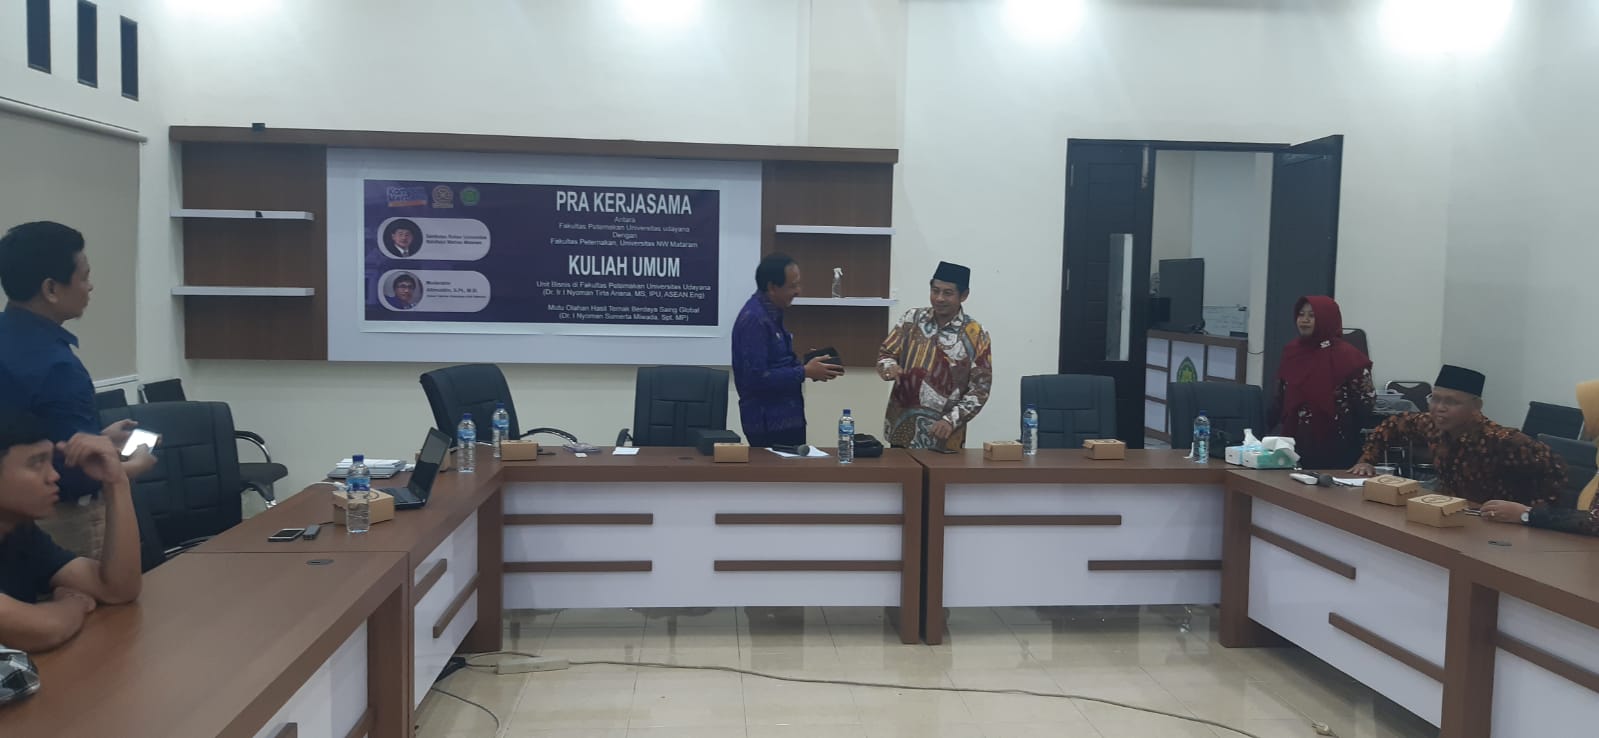 Expanding the Targets of Prospective Students, Fapet Unud Promotion and Socialization of Masters and Doctoral Degrees at Faculty of Animal Husbandry UNW Mataram